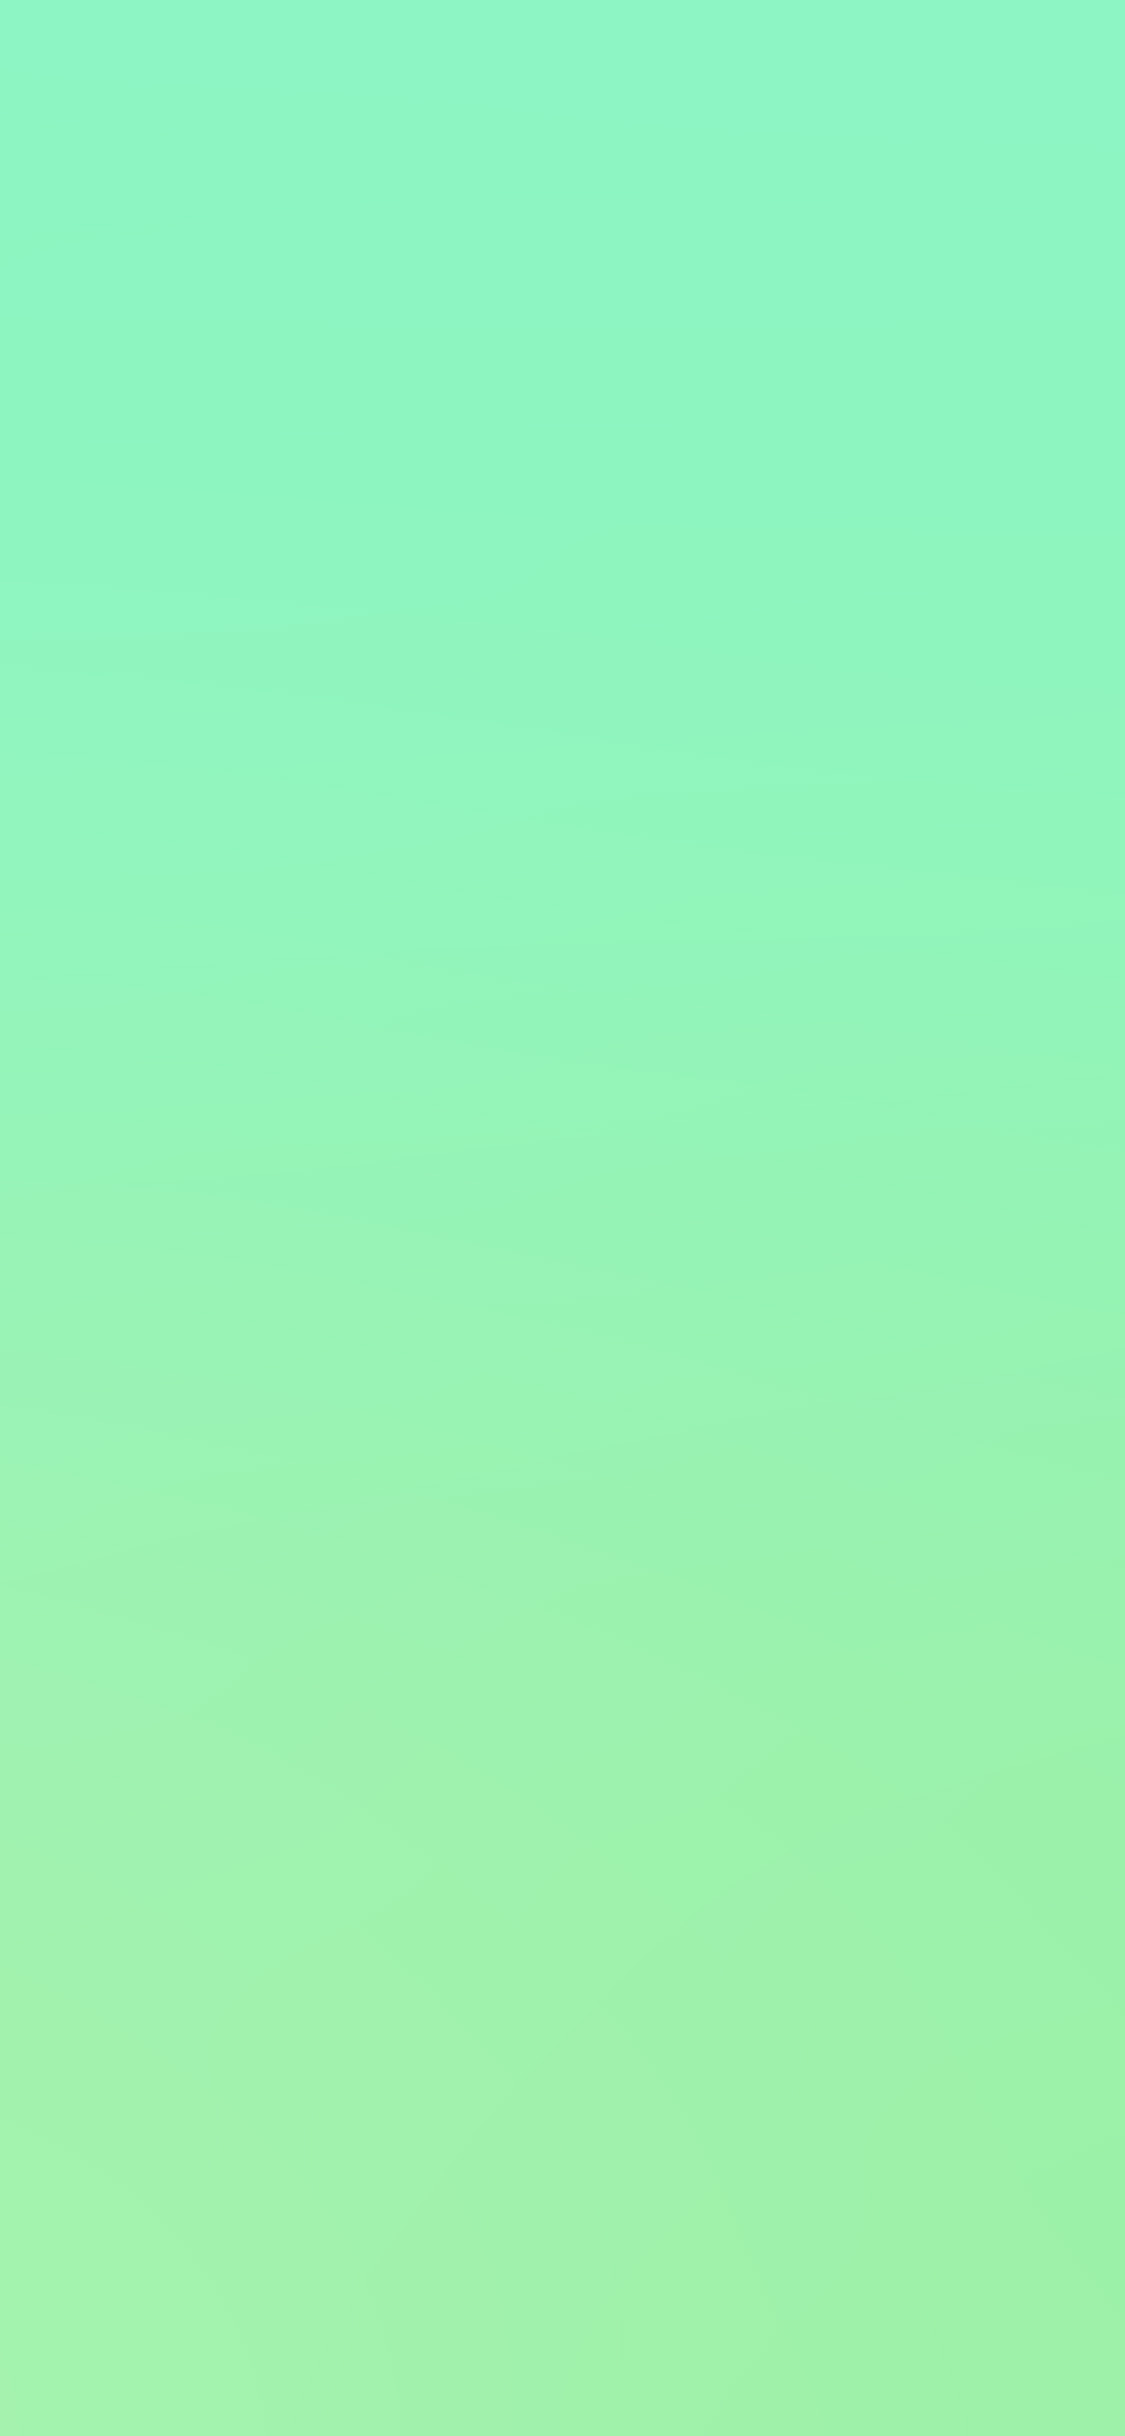 A green background with white and blue lines - Lime green